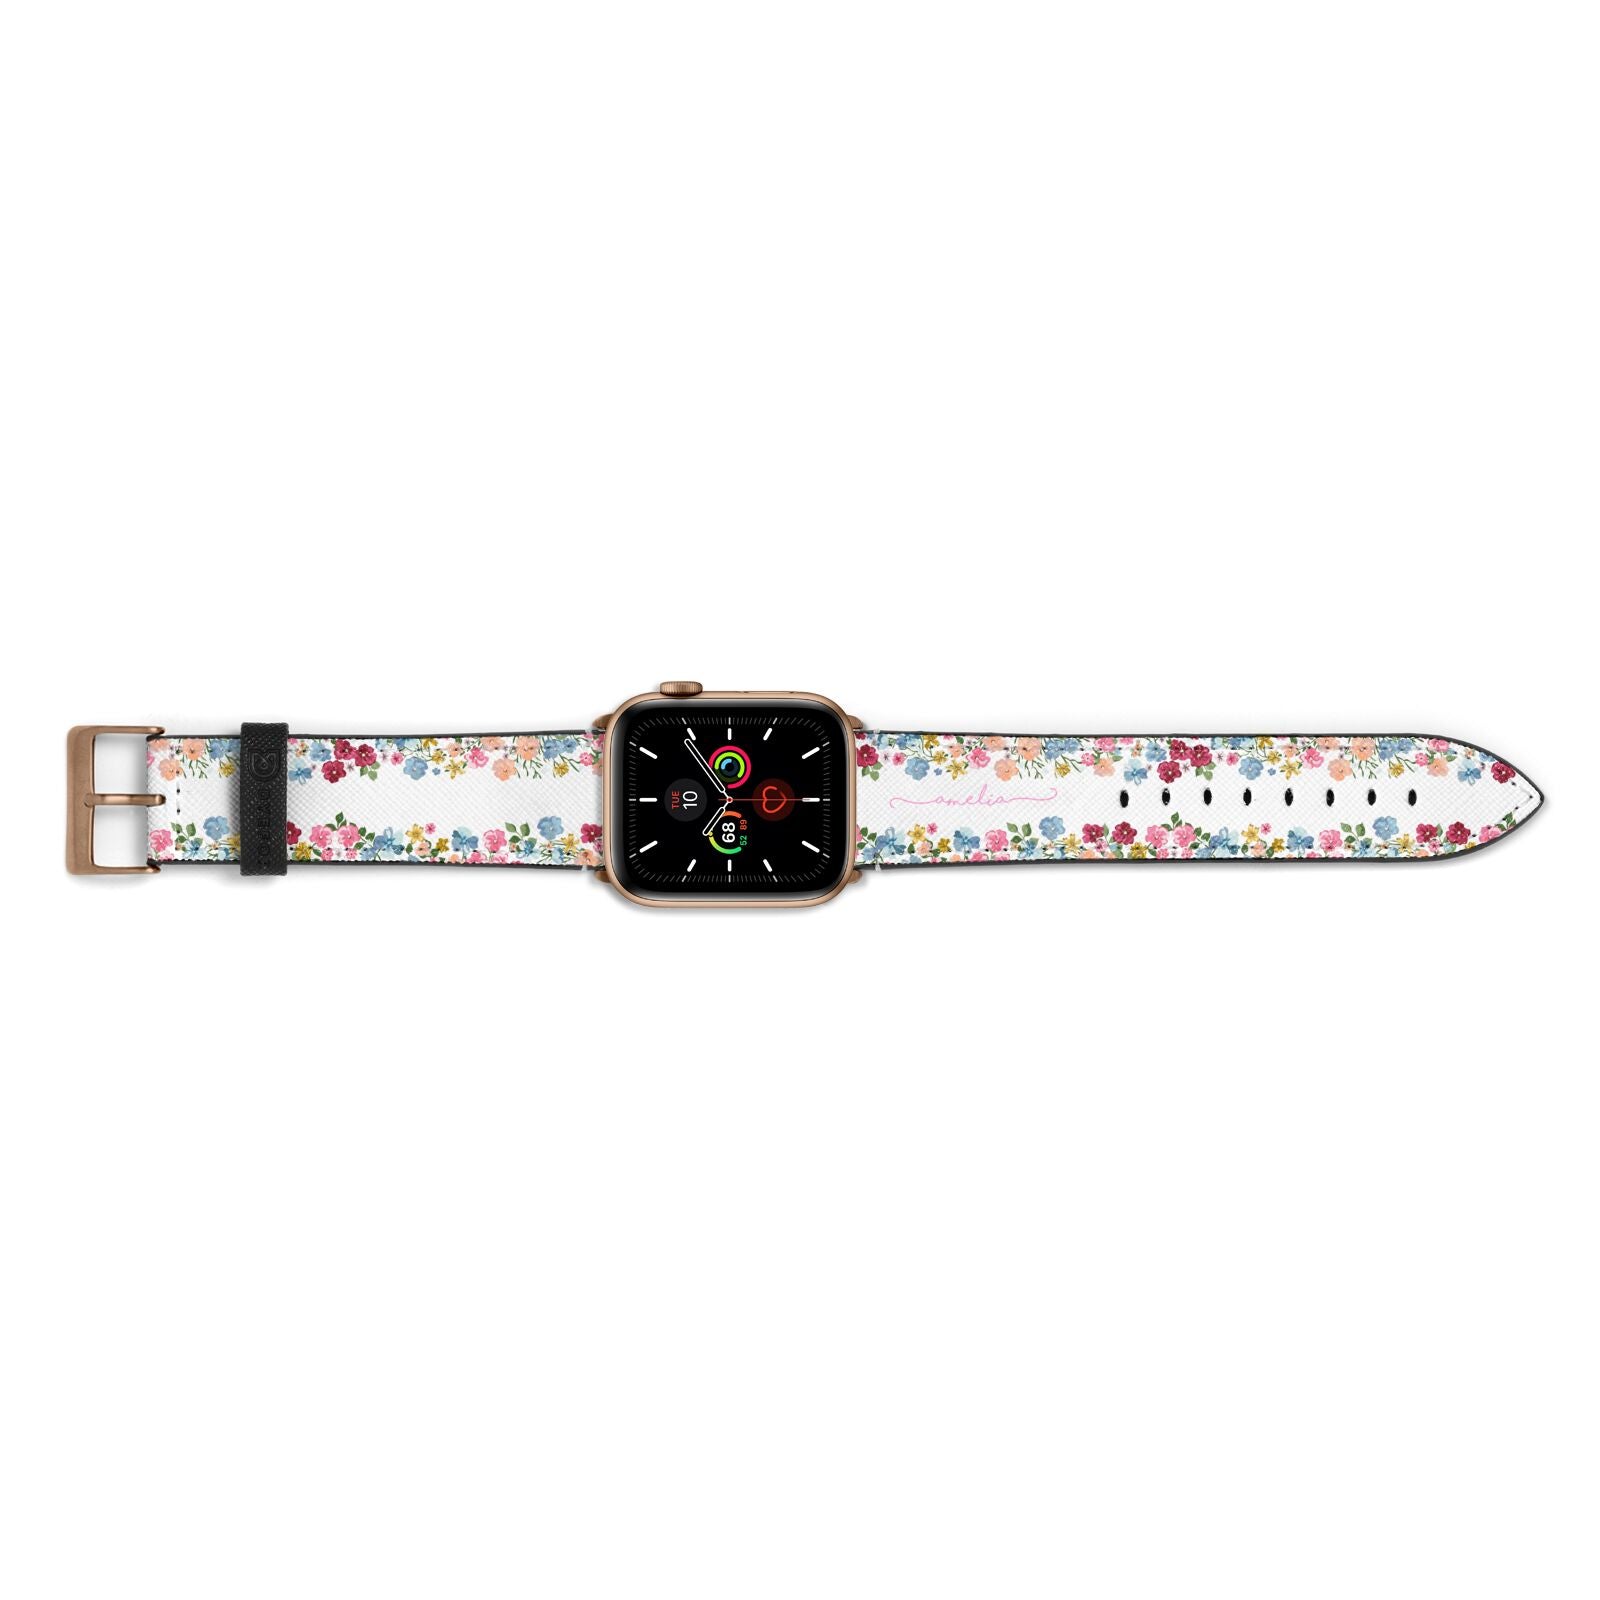 Personalised Floral Meadow Apple Watch Strap Landscape Image Gold Hardware